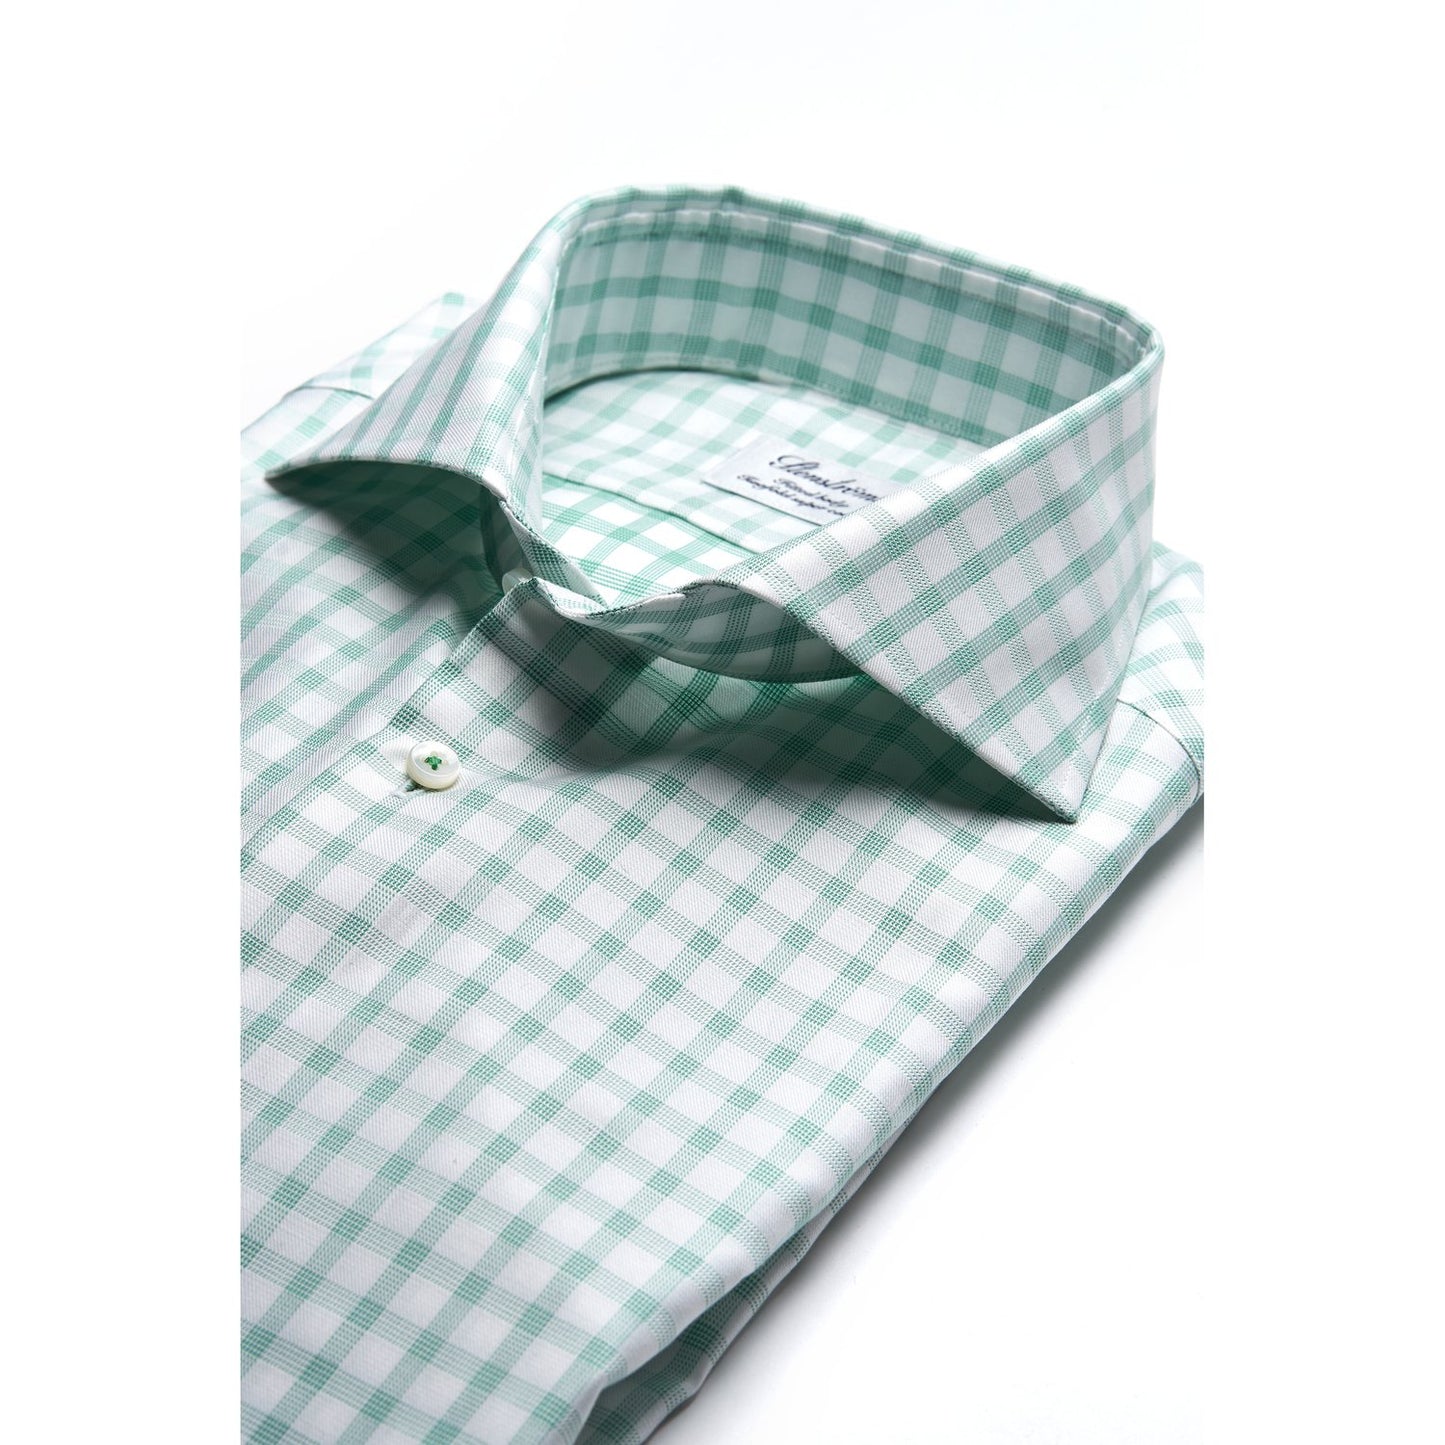 Stenströms Sport Shirt in Green and White Check Pattern